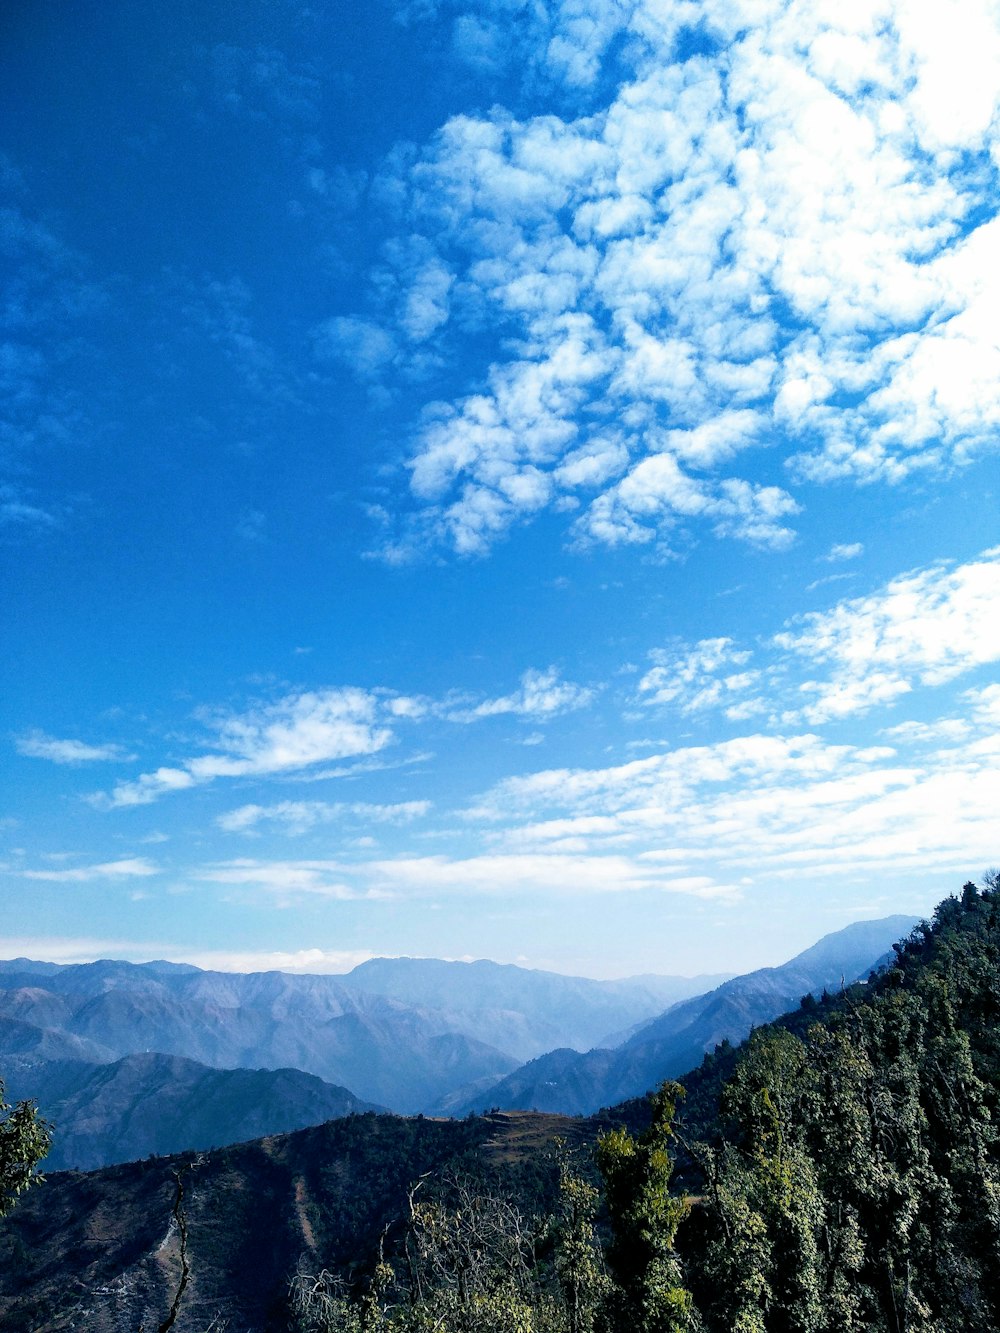 a scenic view of a mountain range under a blue sky